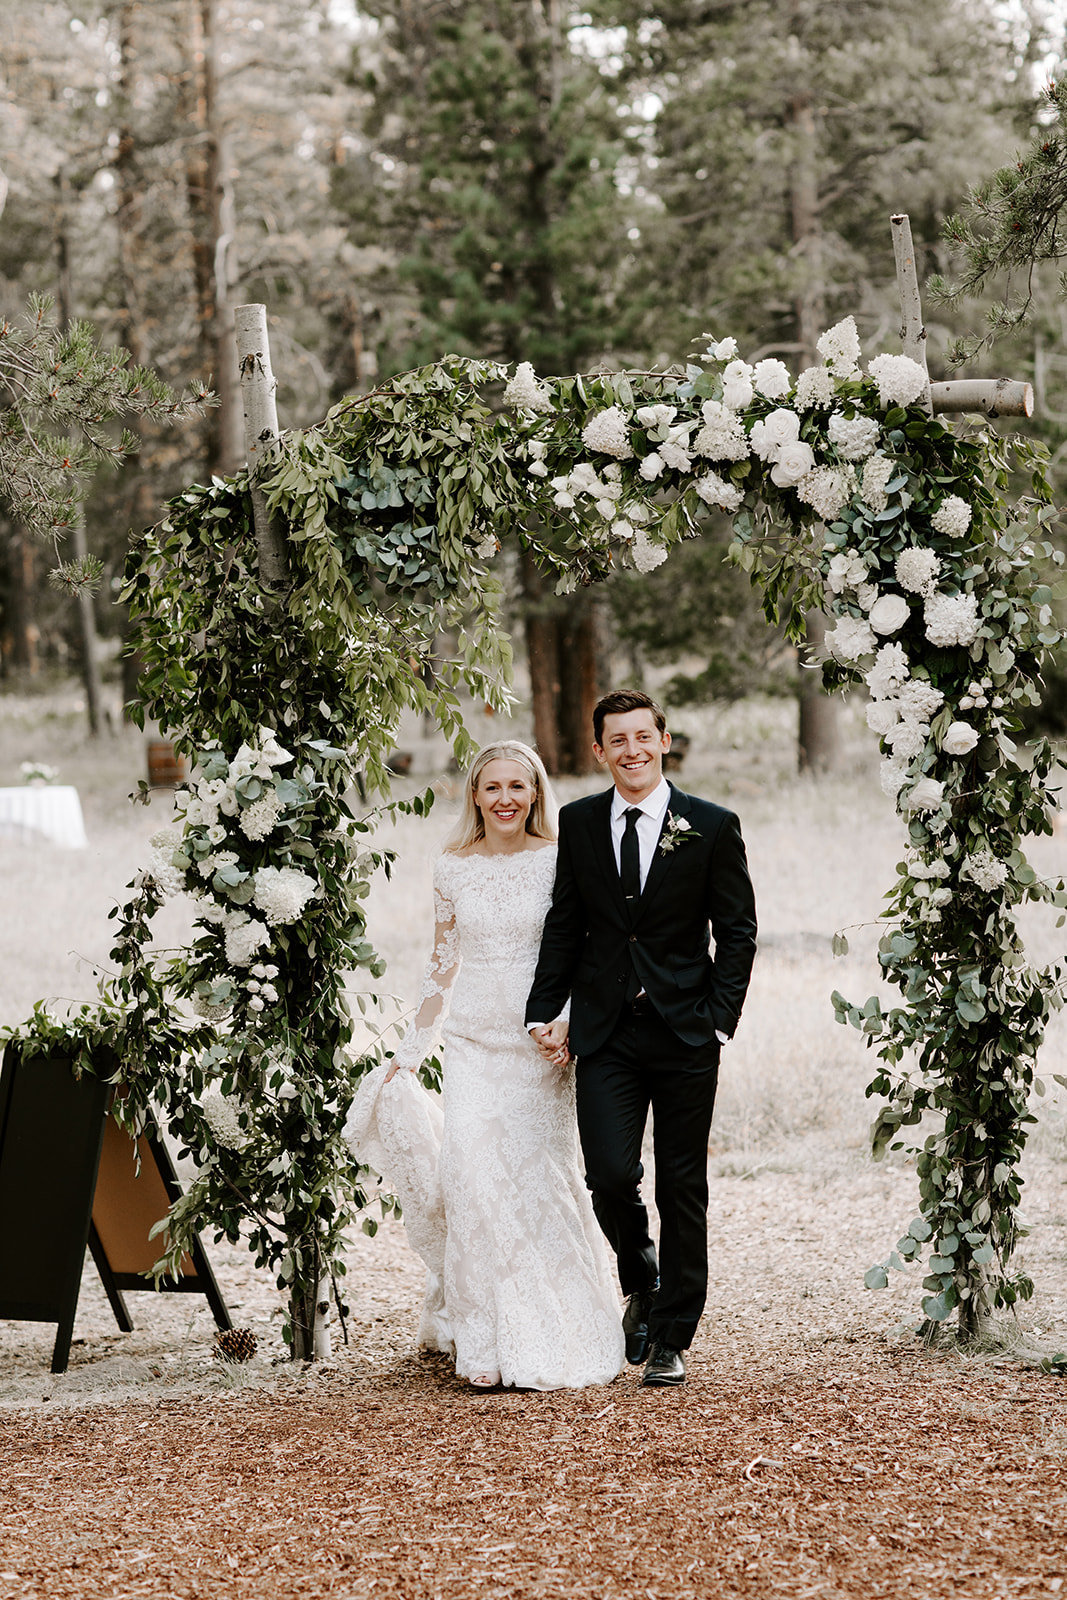 Lake Tahoe Wedding Planners couple under white floral arch at venue Mitchell's Mountain Meadows Sierraville near Truckee, Joy of Life Events image by The Shepard Photography